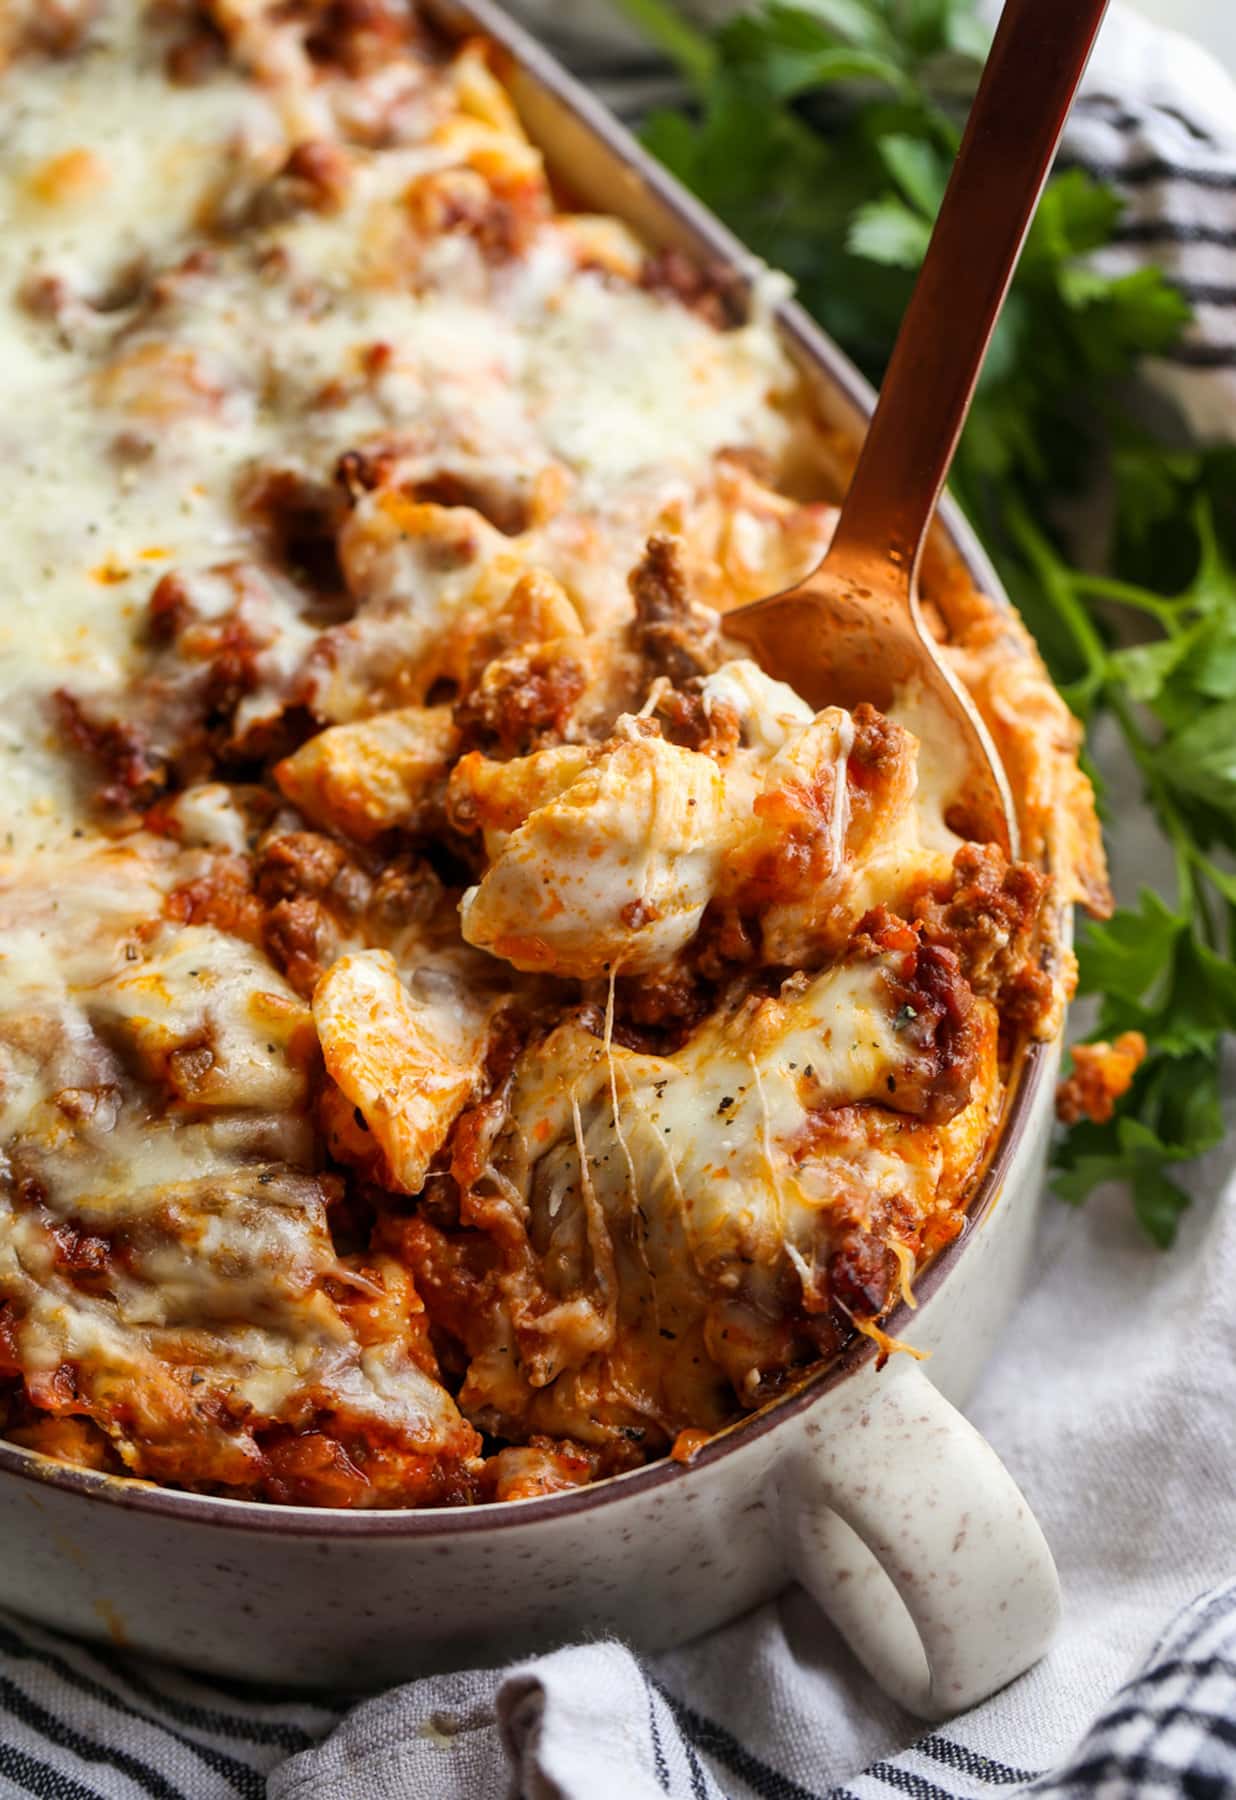 Shell pasta baked with meat sauce, ricotta cheese, and marinara sauce topped with mozzarella being served with a spoon.